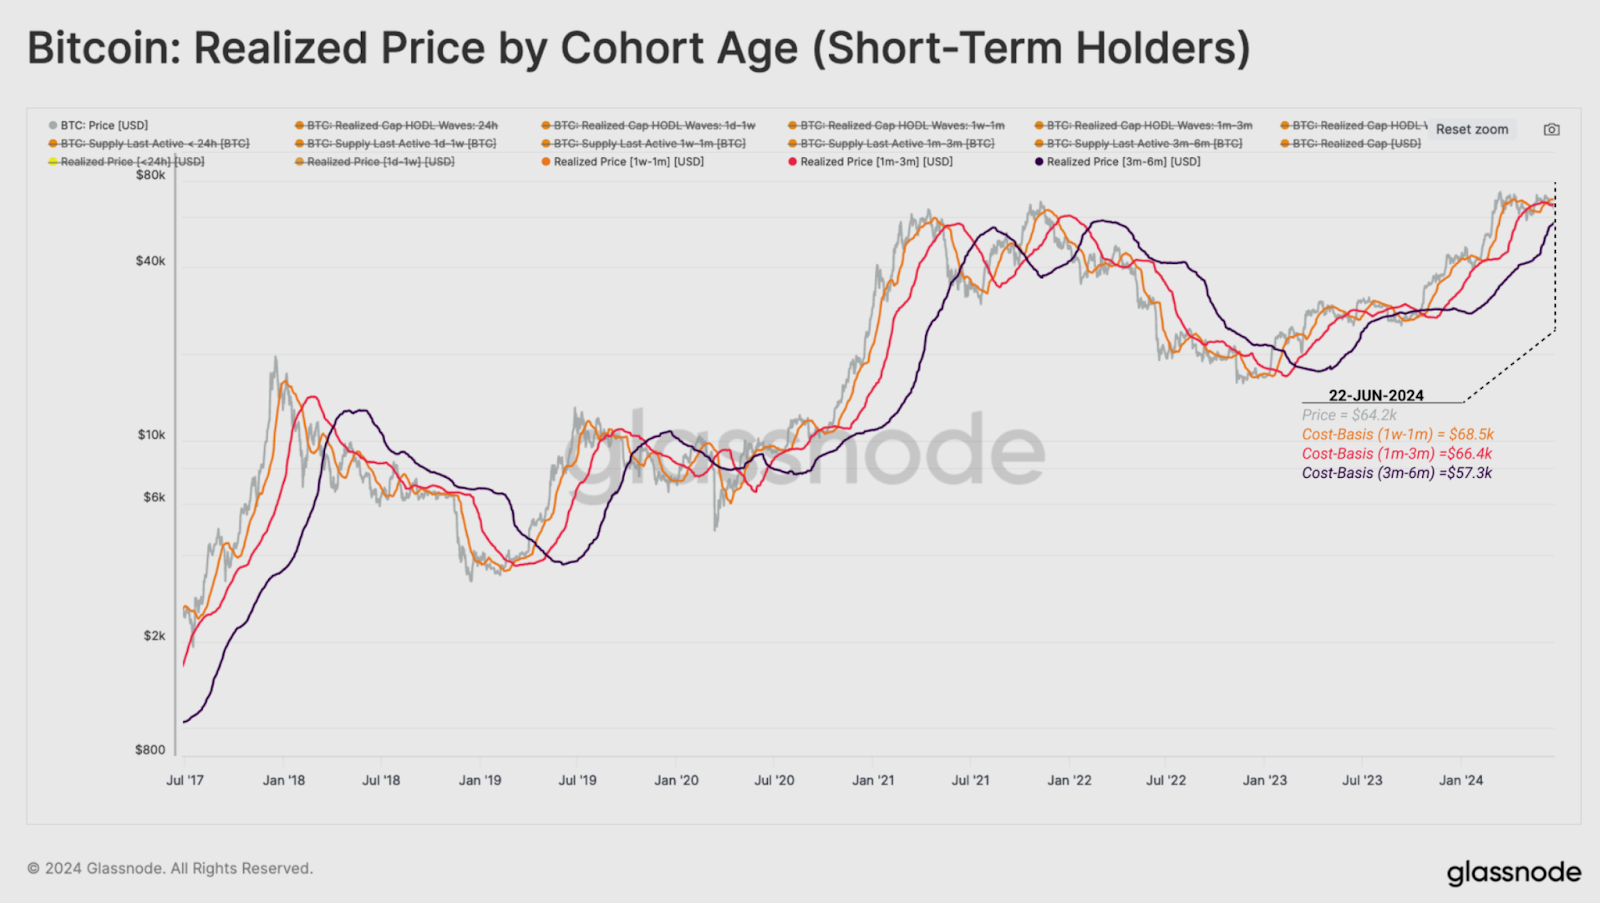 Bitcoin proice change by cohort age